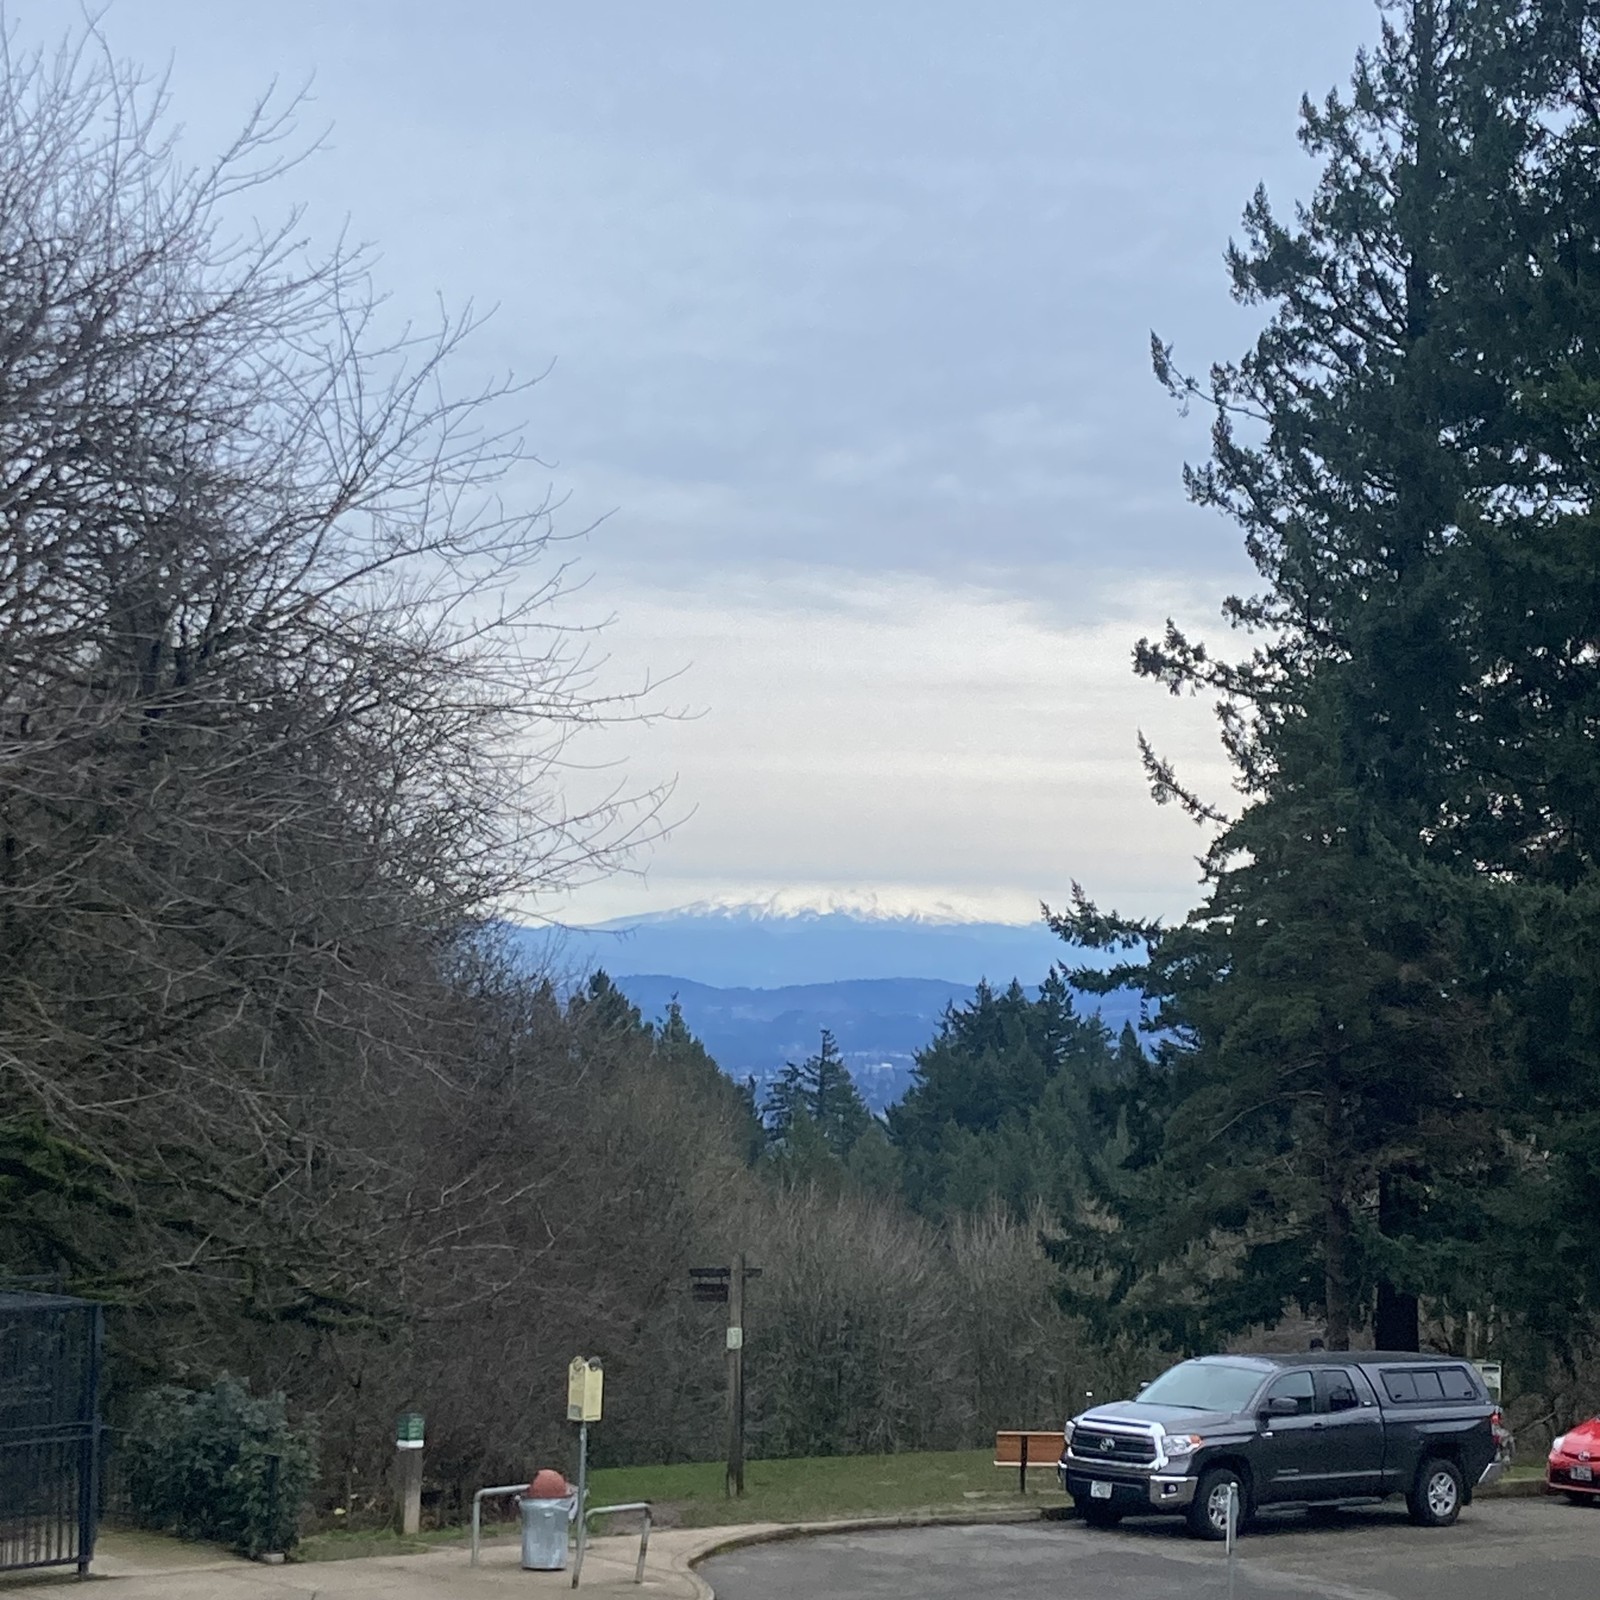 It’s difficult to believe but the base of Mt. Hood is visible under a heavy layer of stratus clouds